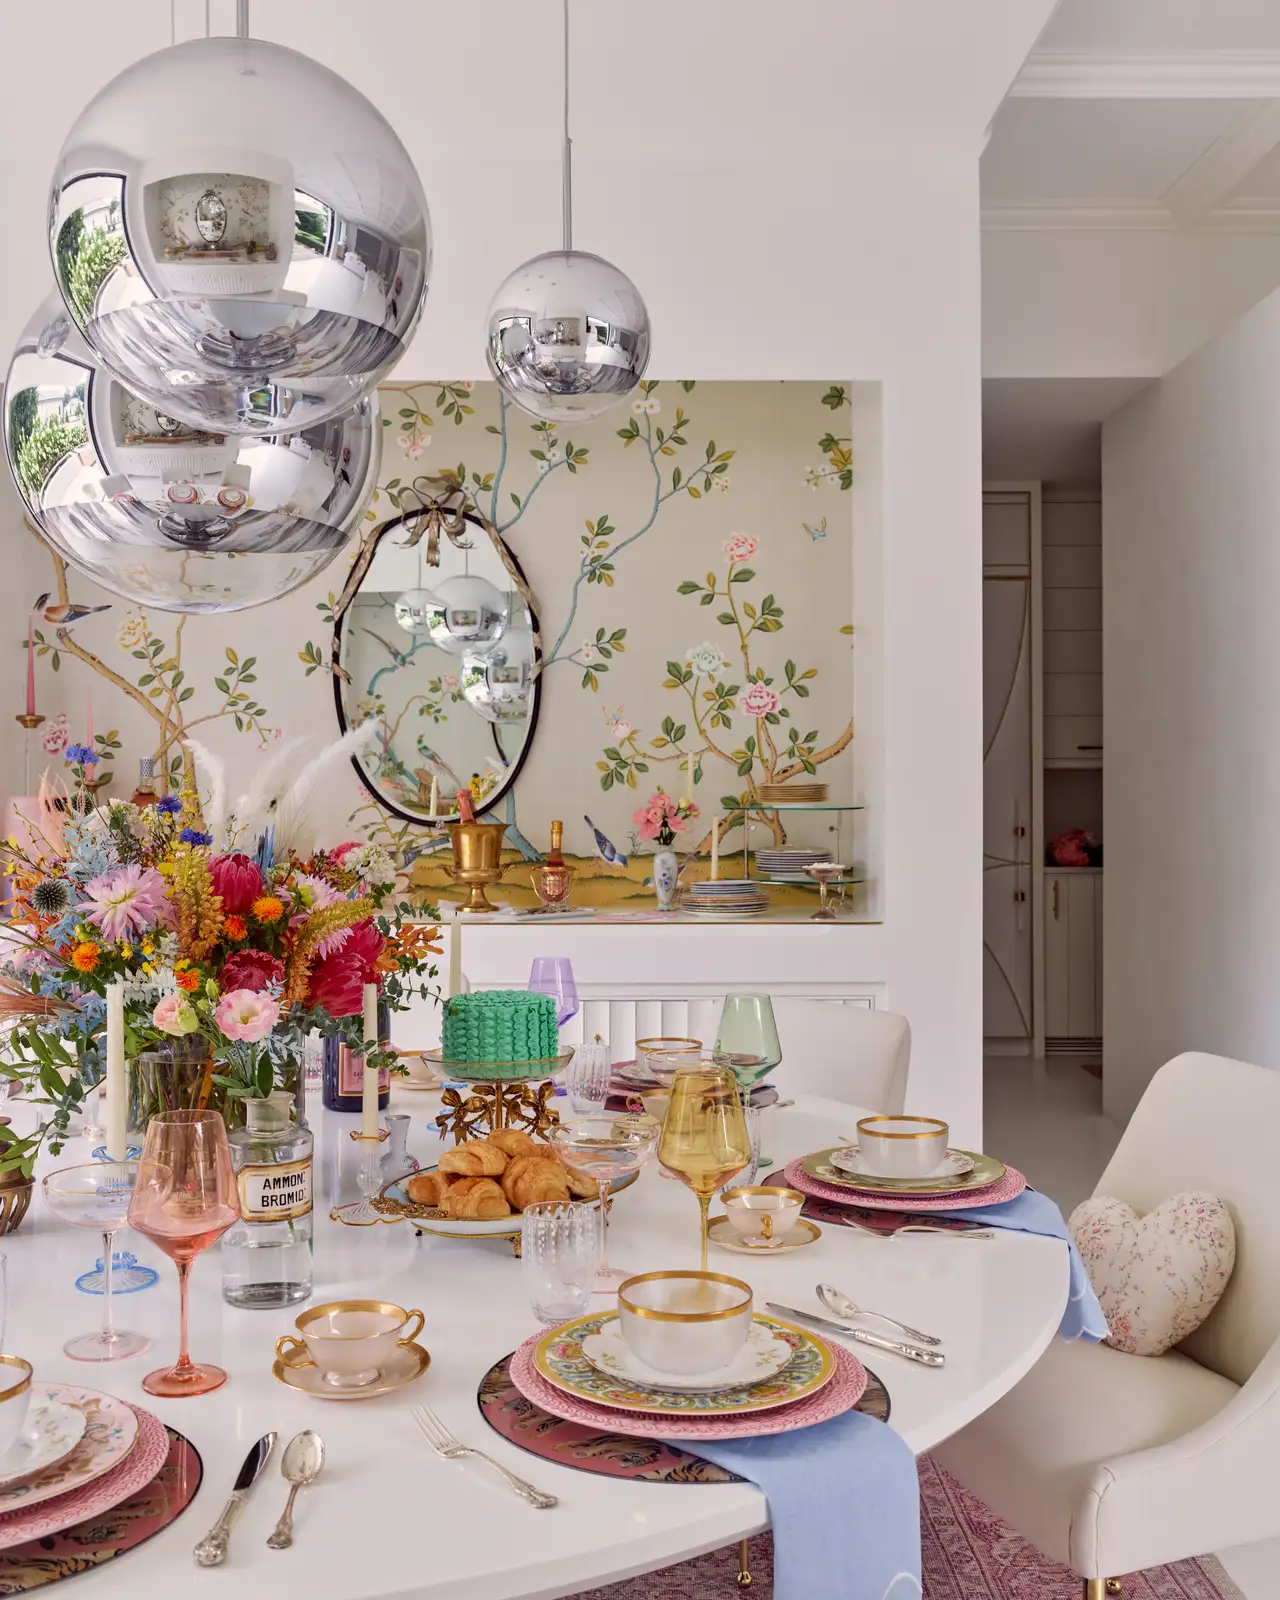 A dining table with colorful dishes